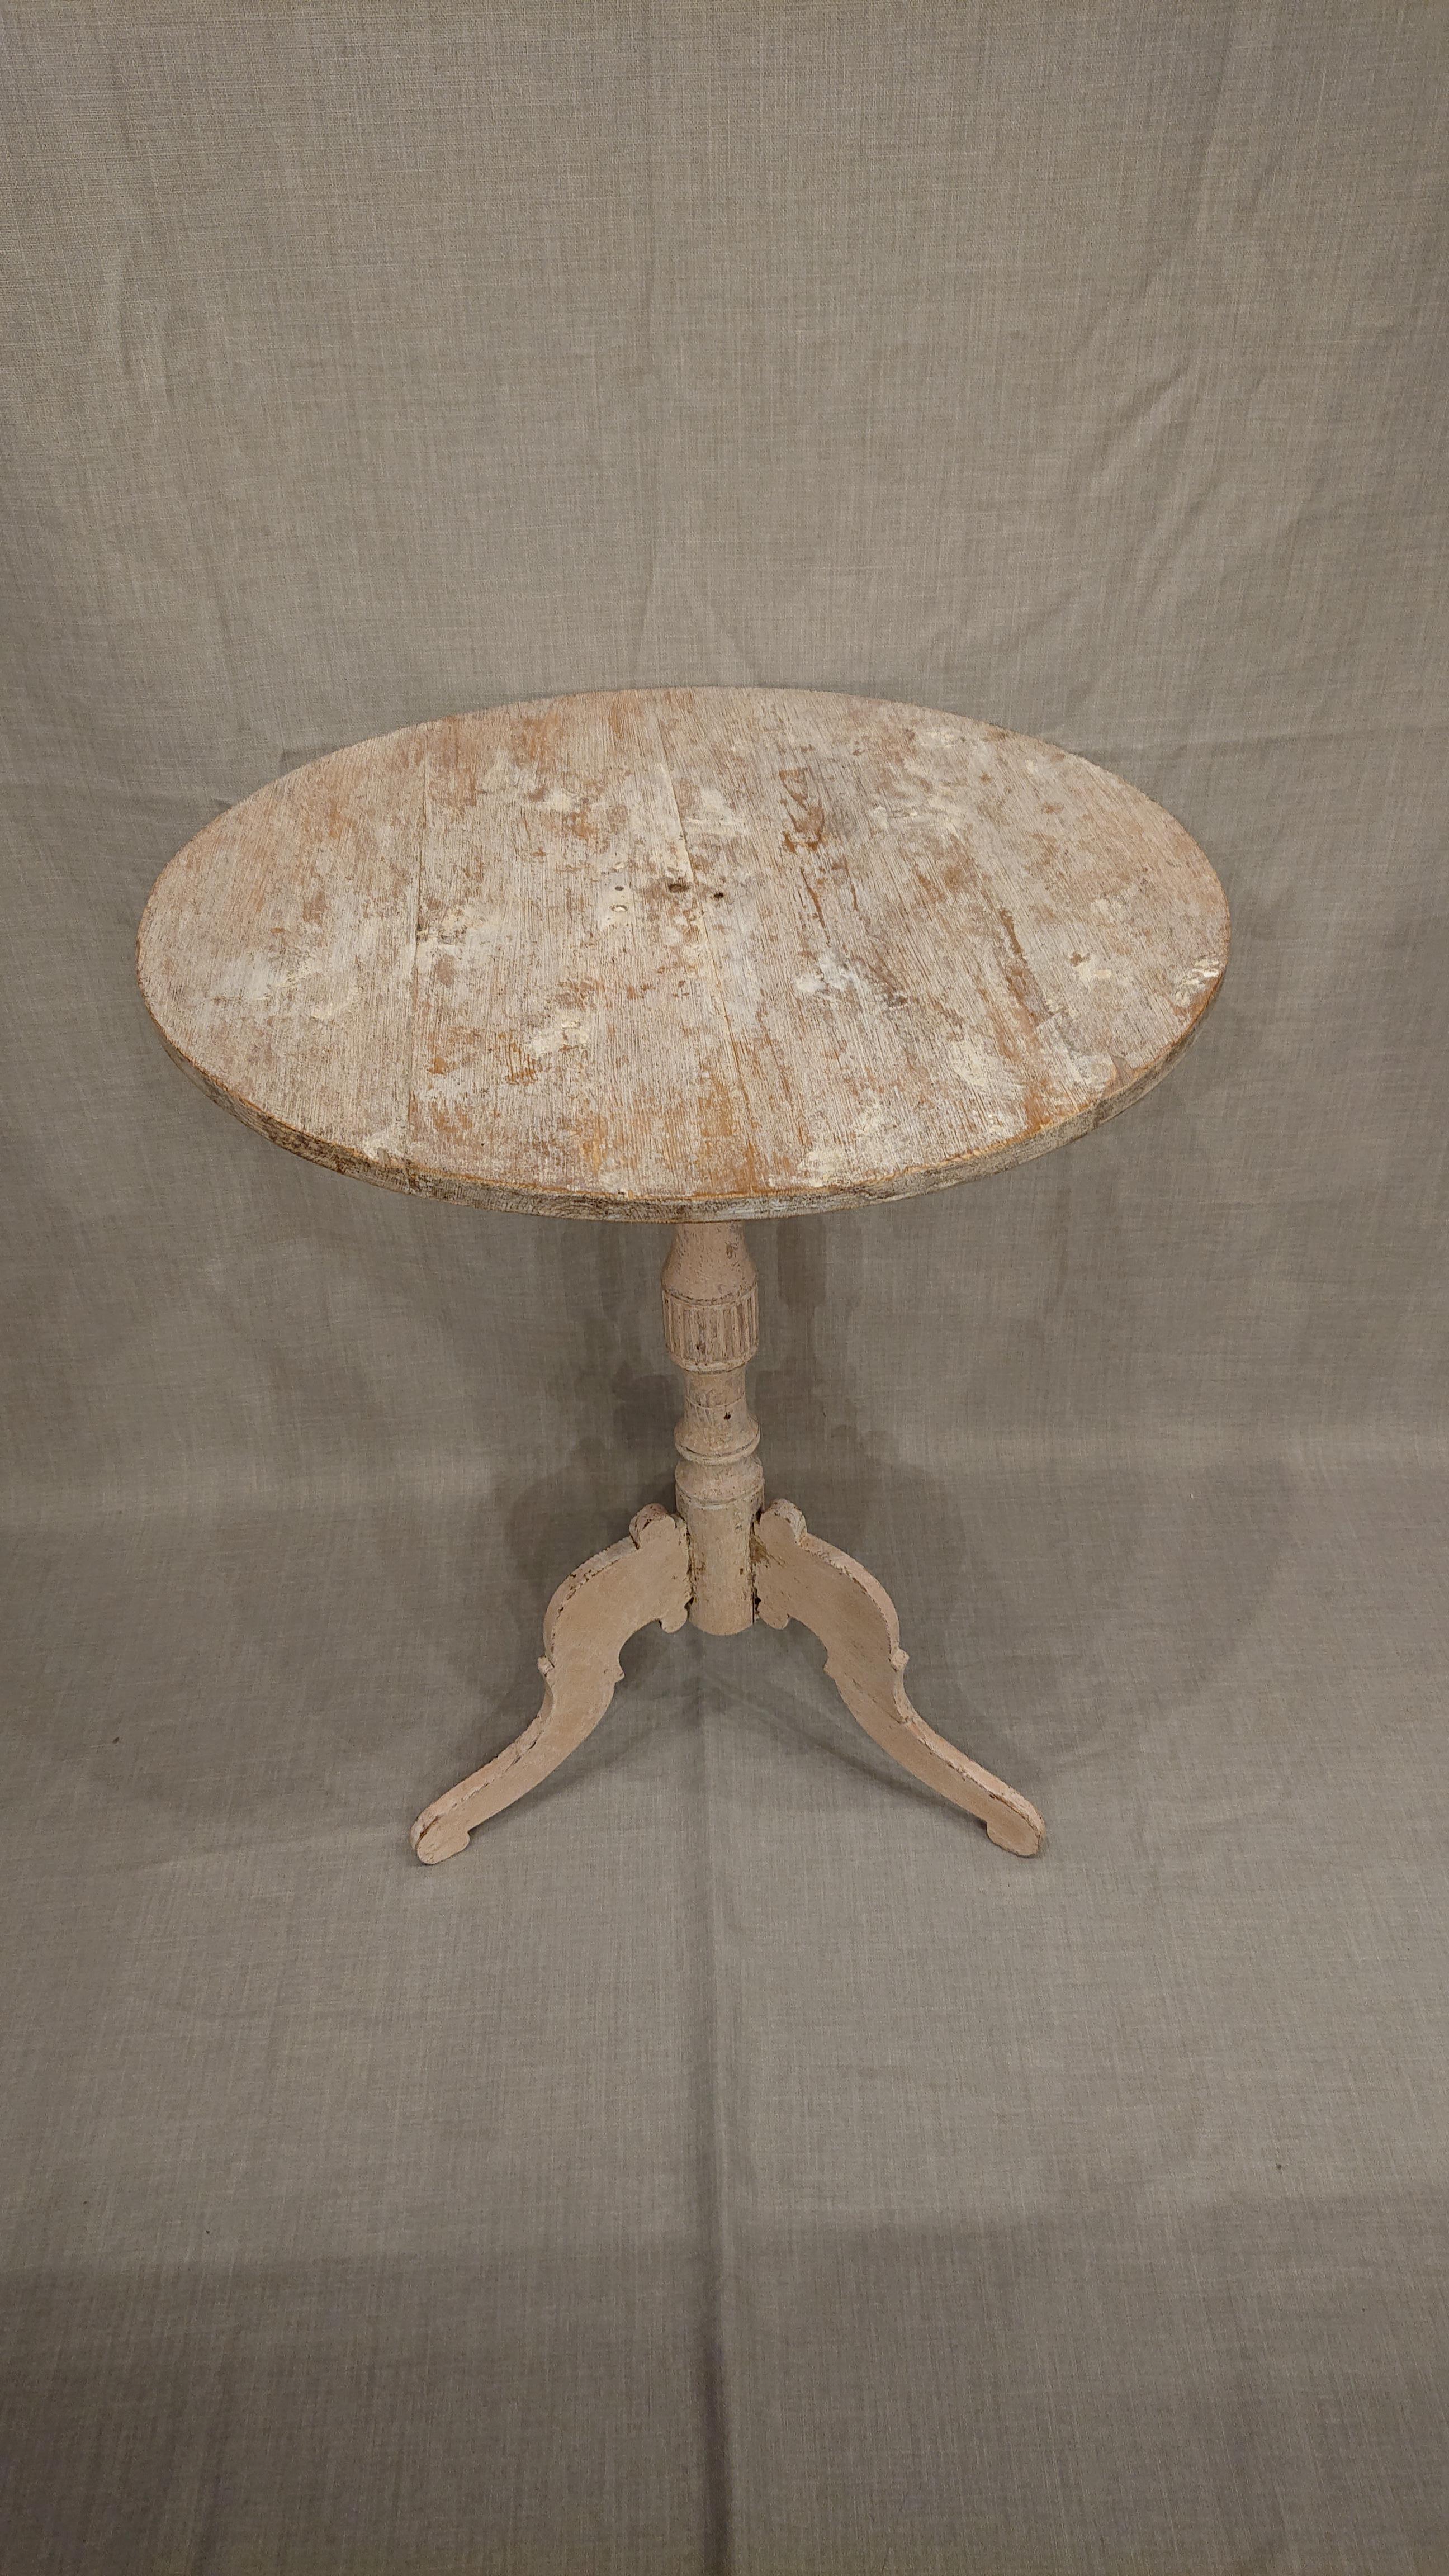 19th century Swedish Gustavian pedestal table from Skelleftea, Northern Sweden.
A charming classic 19th century Swedish round Pedestal table with turned base supported by beautifully carved legs .Nice carved details on the base.
The table is